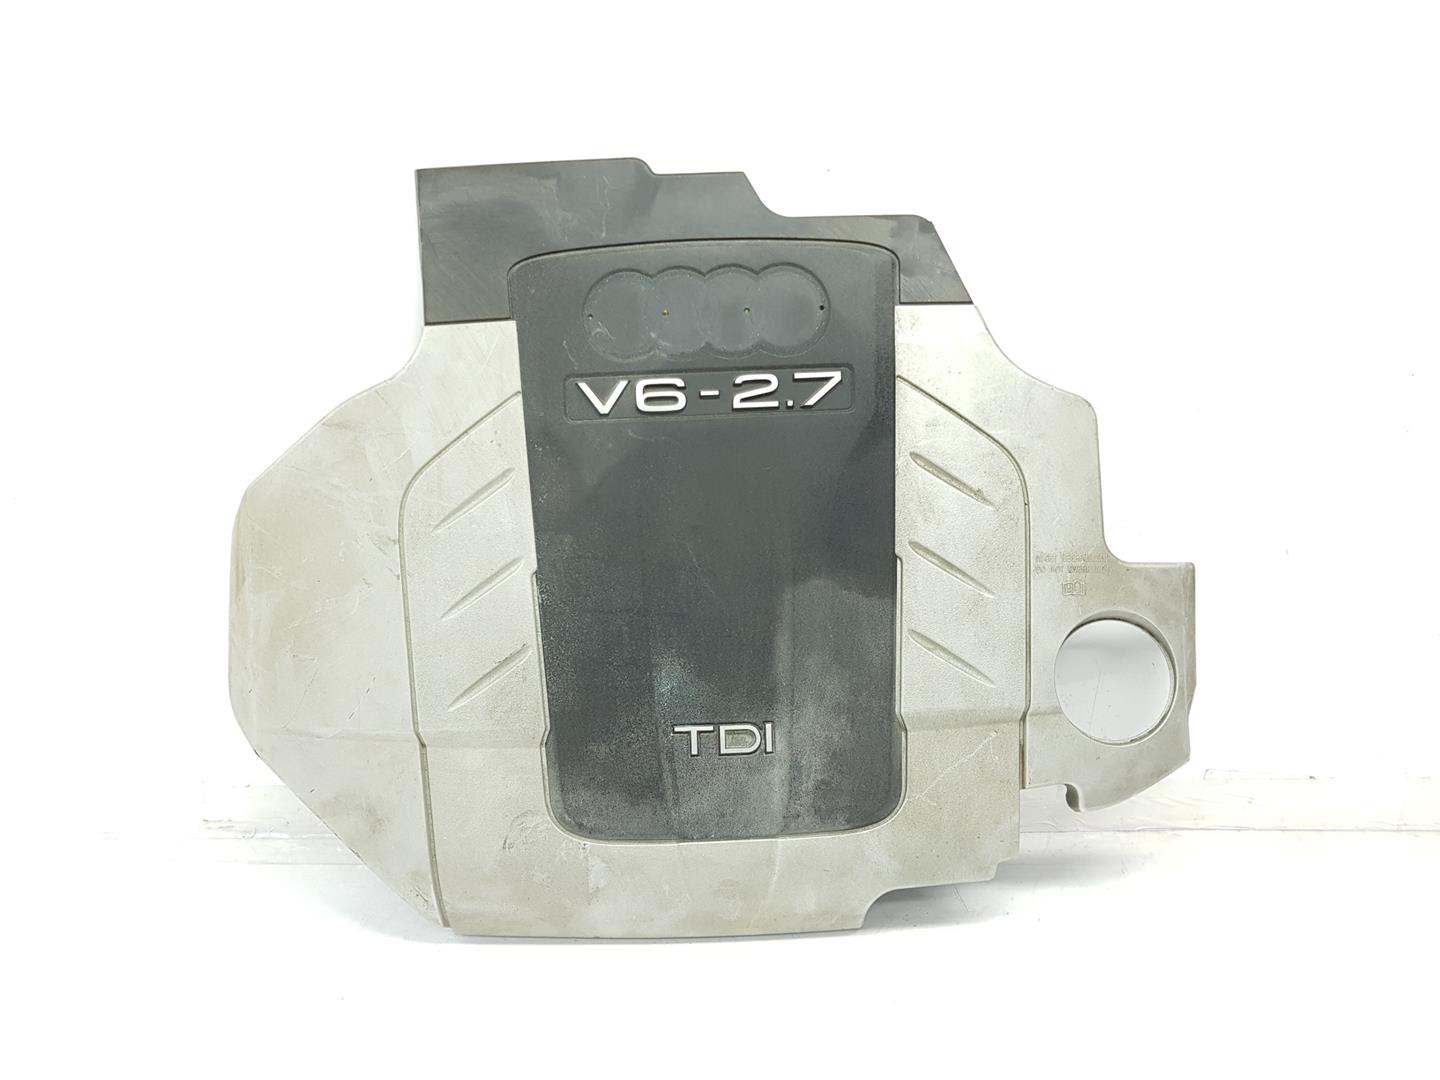 AUDI A6 C6/4F (2004-2011) Engine Cover 059103925BJ, 059103925BJ 24219383